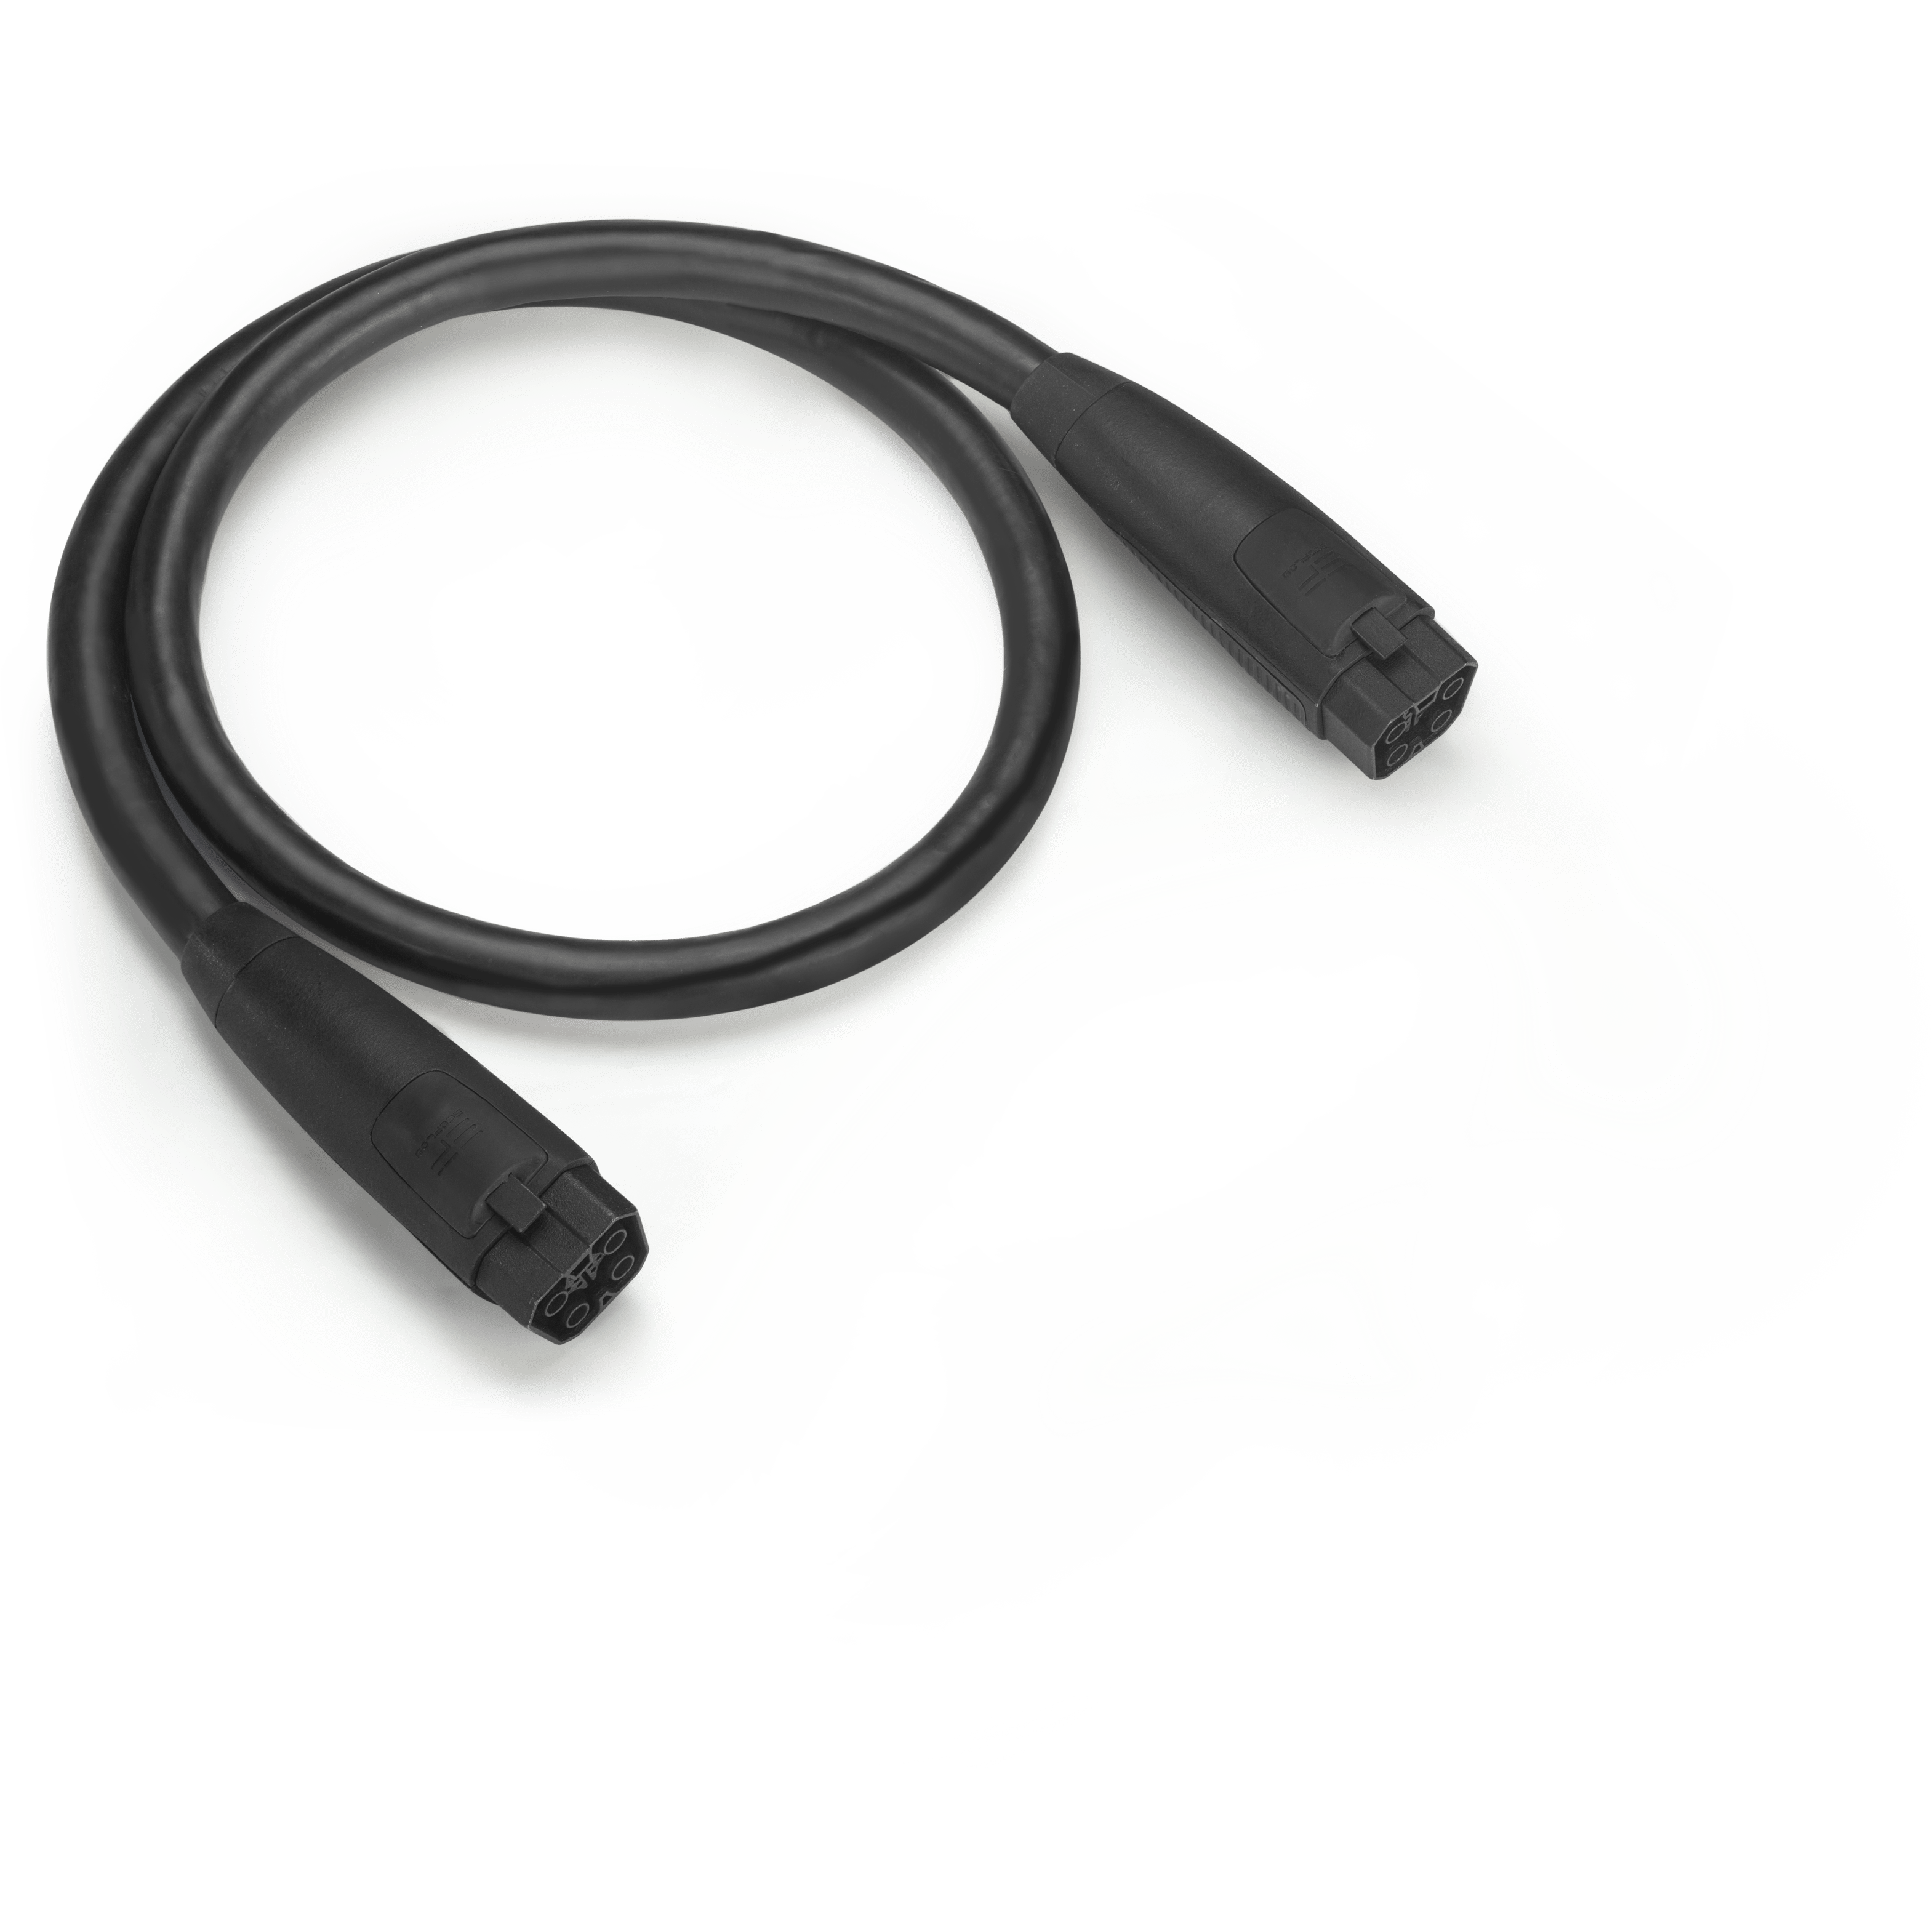 EcoFlow EcoFlow DELTA Pro Extra Battery Cable Accessory